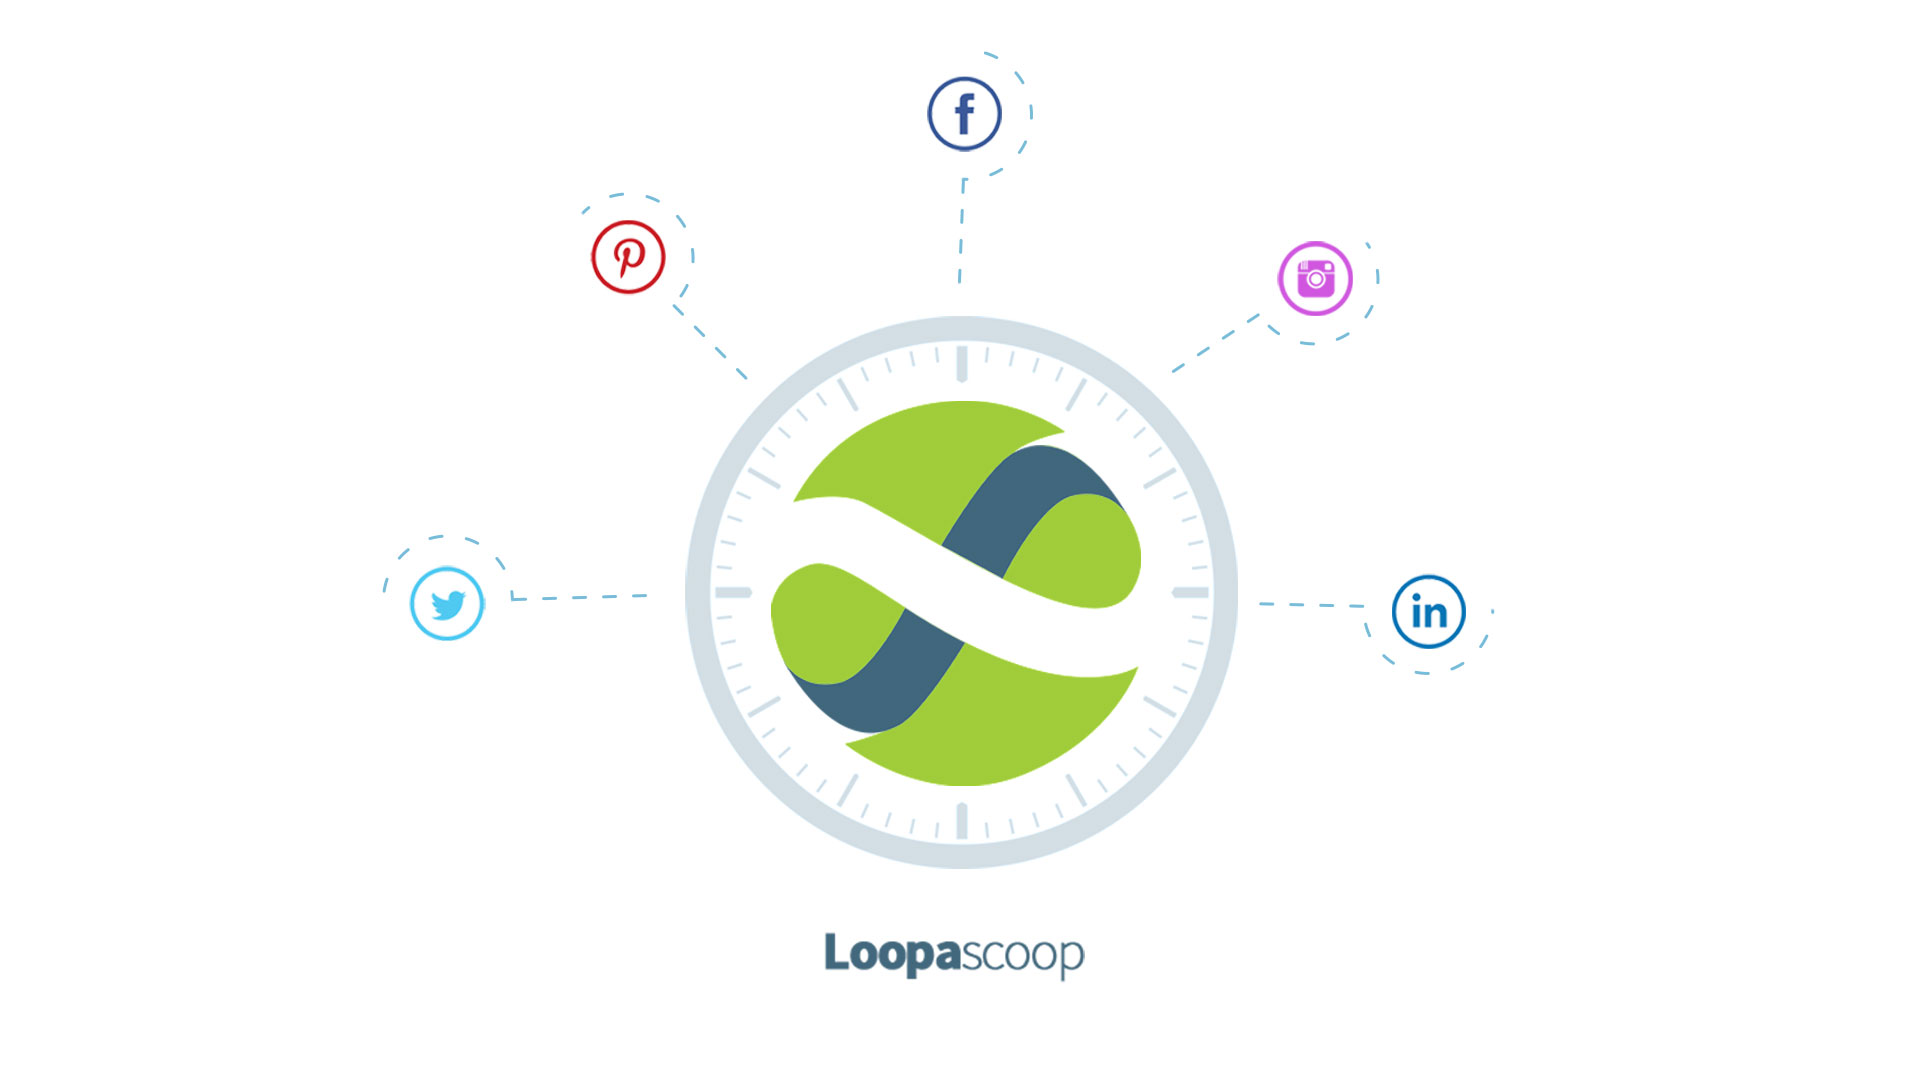 Loopascoop is a time-saving content marketing platform.Create, Post, Schedule & Analyse all within one centralised intelligent workspace. Easily create and schedule all your content ahead of time.